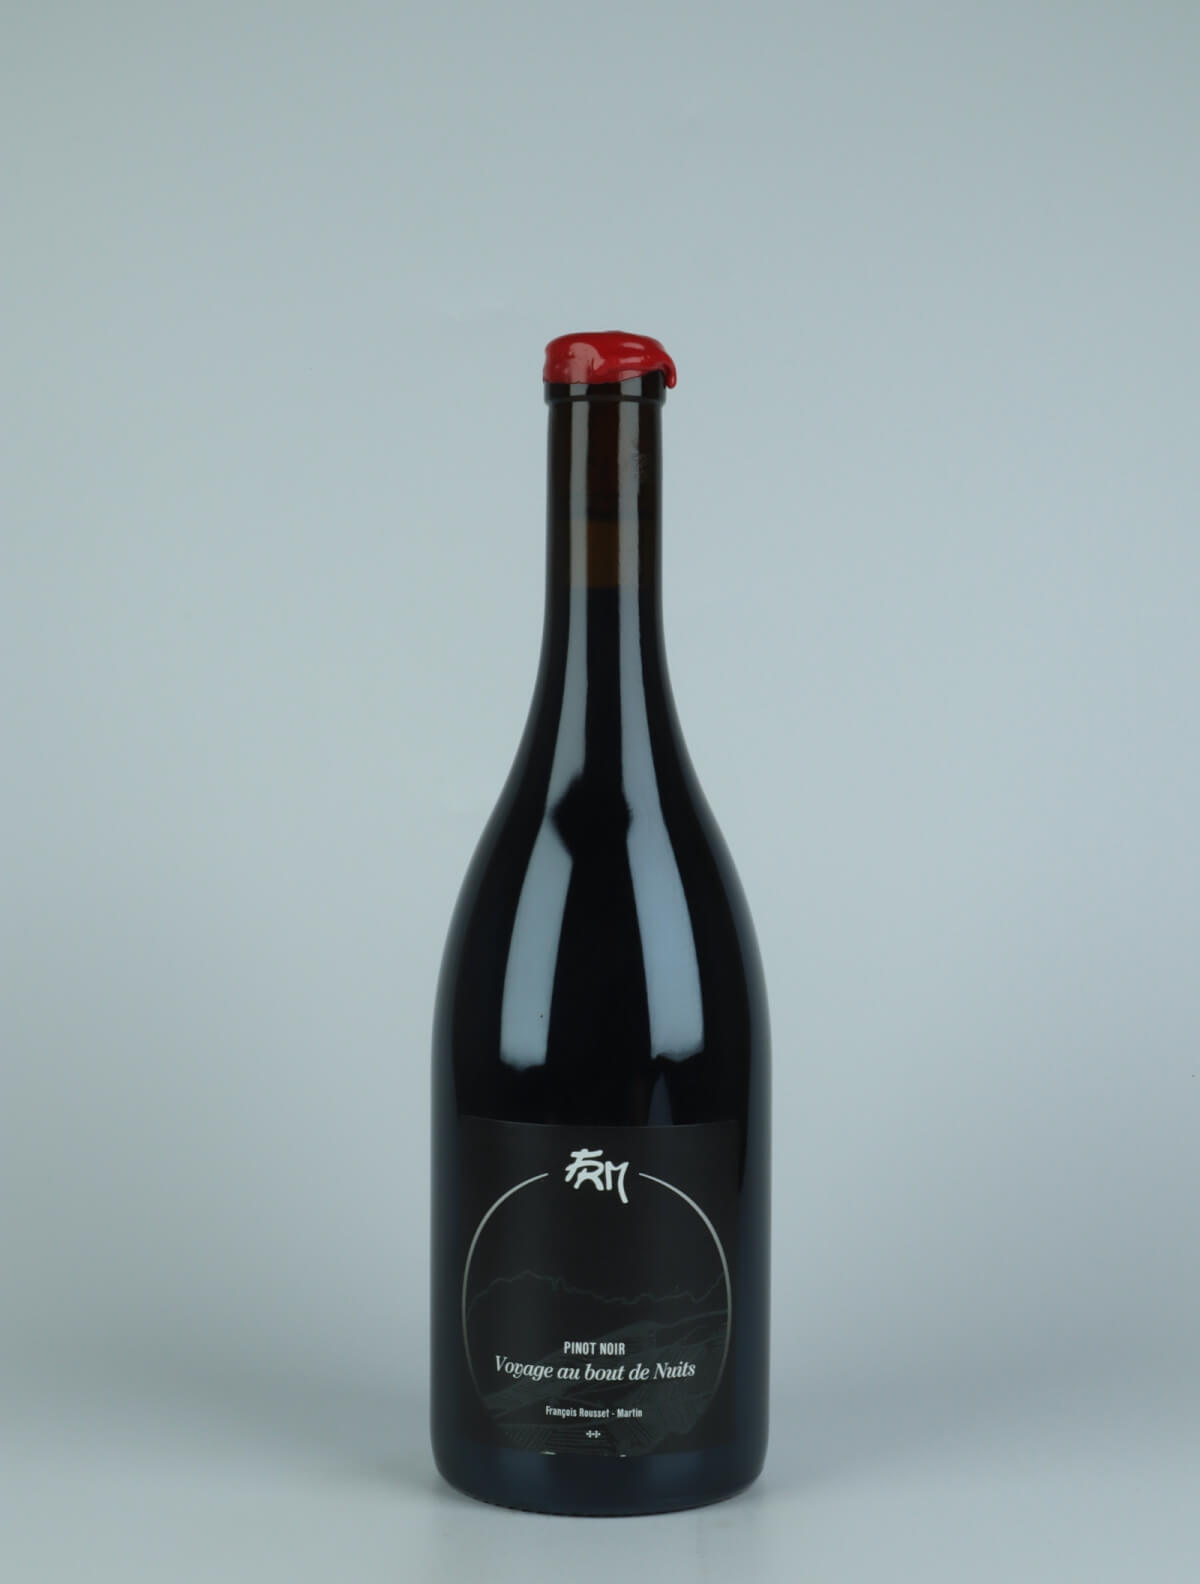 A bottle 2018 Voyage au Bout Nuits - Pinot Noir Red wine from François Rousset-Martin, Jura in France